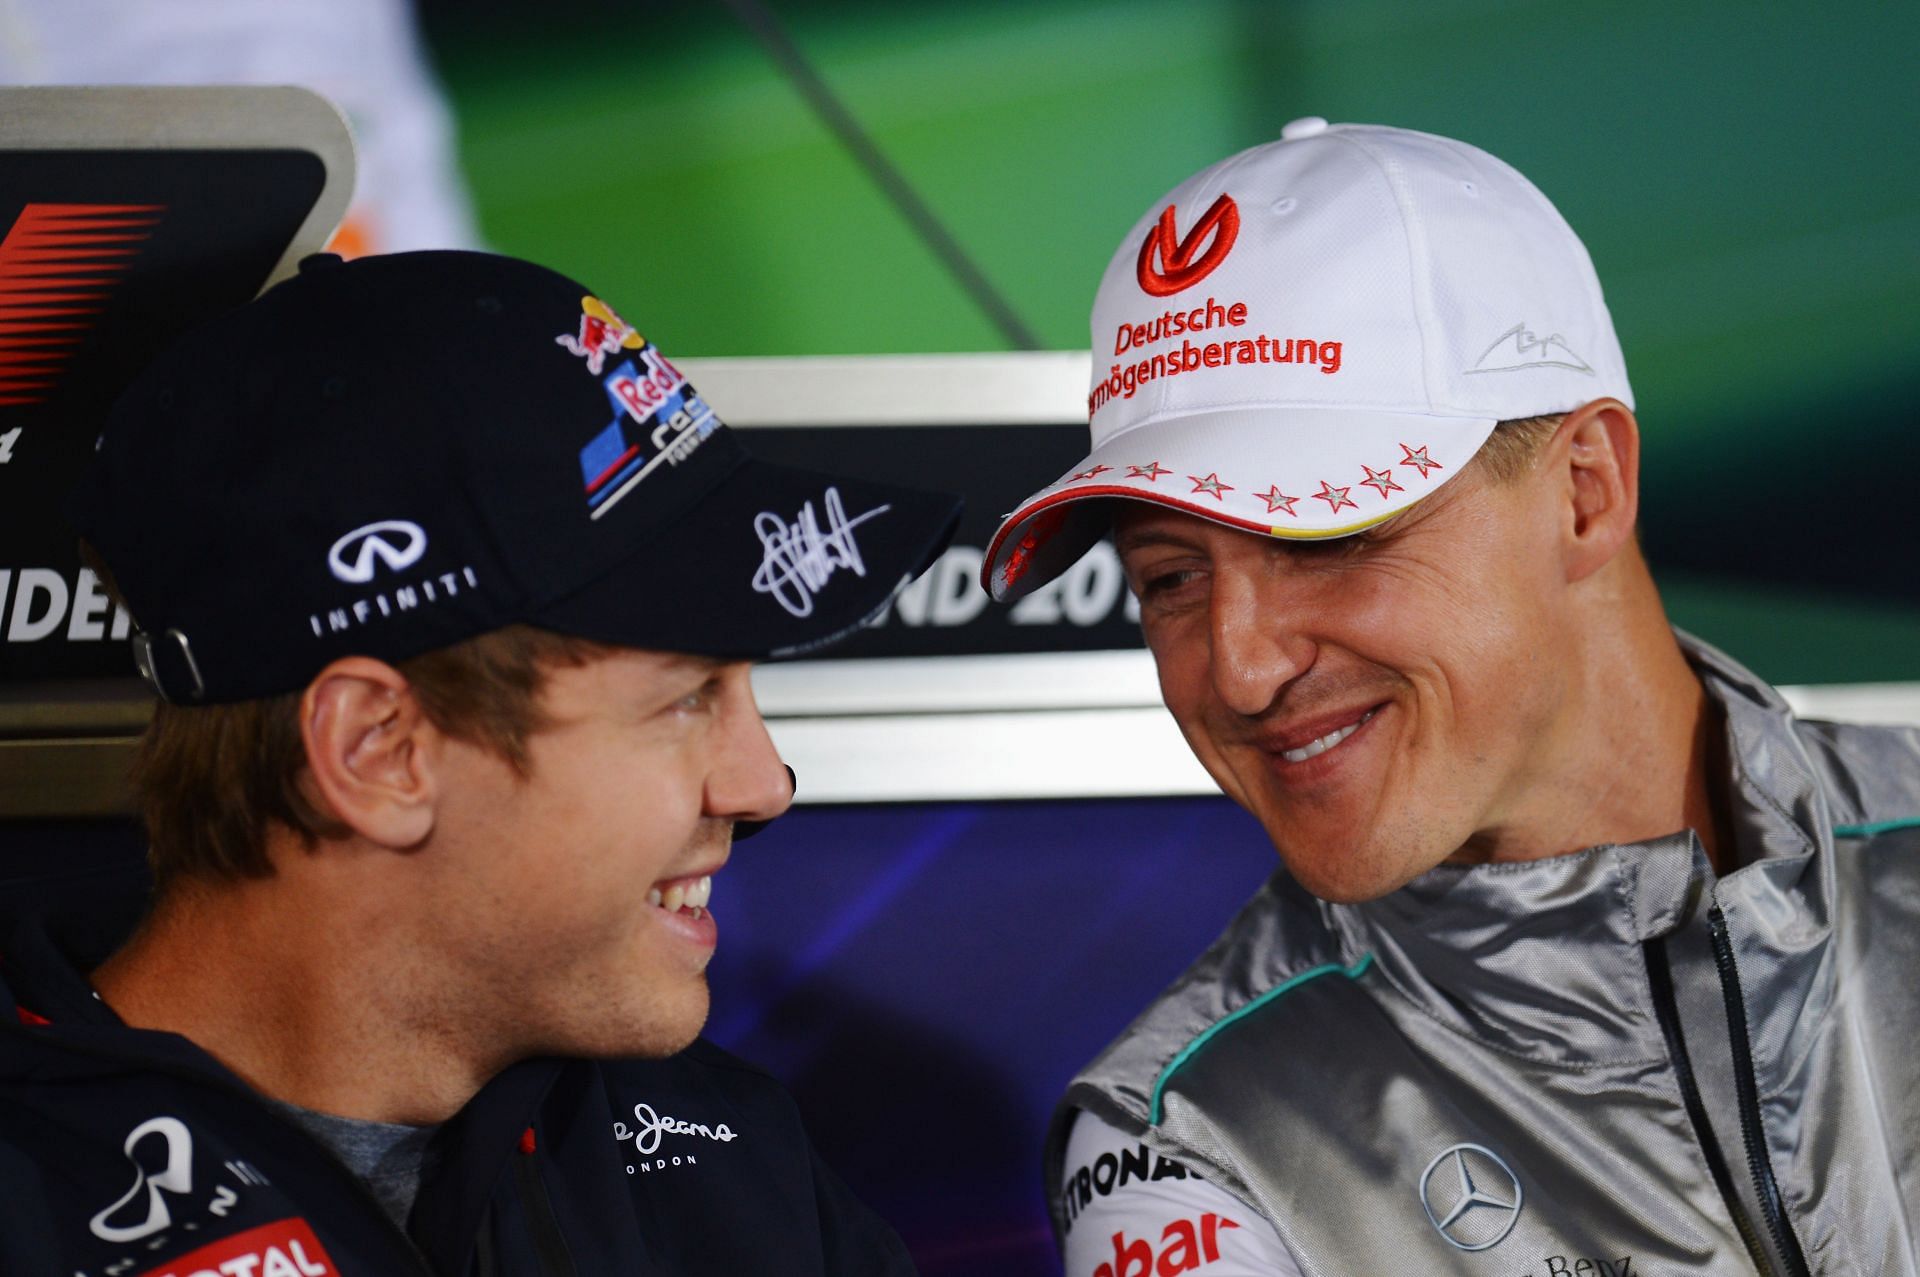 F1 Grand Prix of Germany - Michael Schumacher shared his racing experience with Sebastian Vettel.